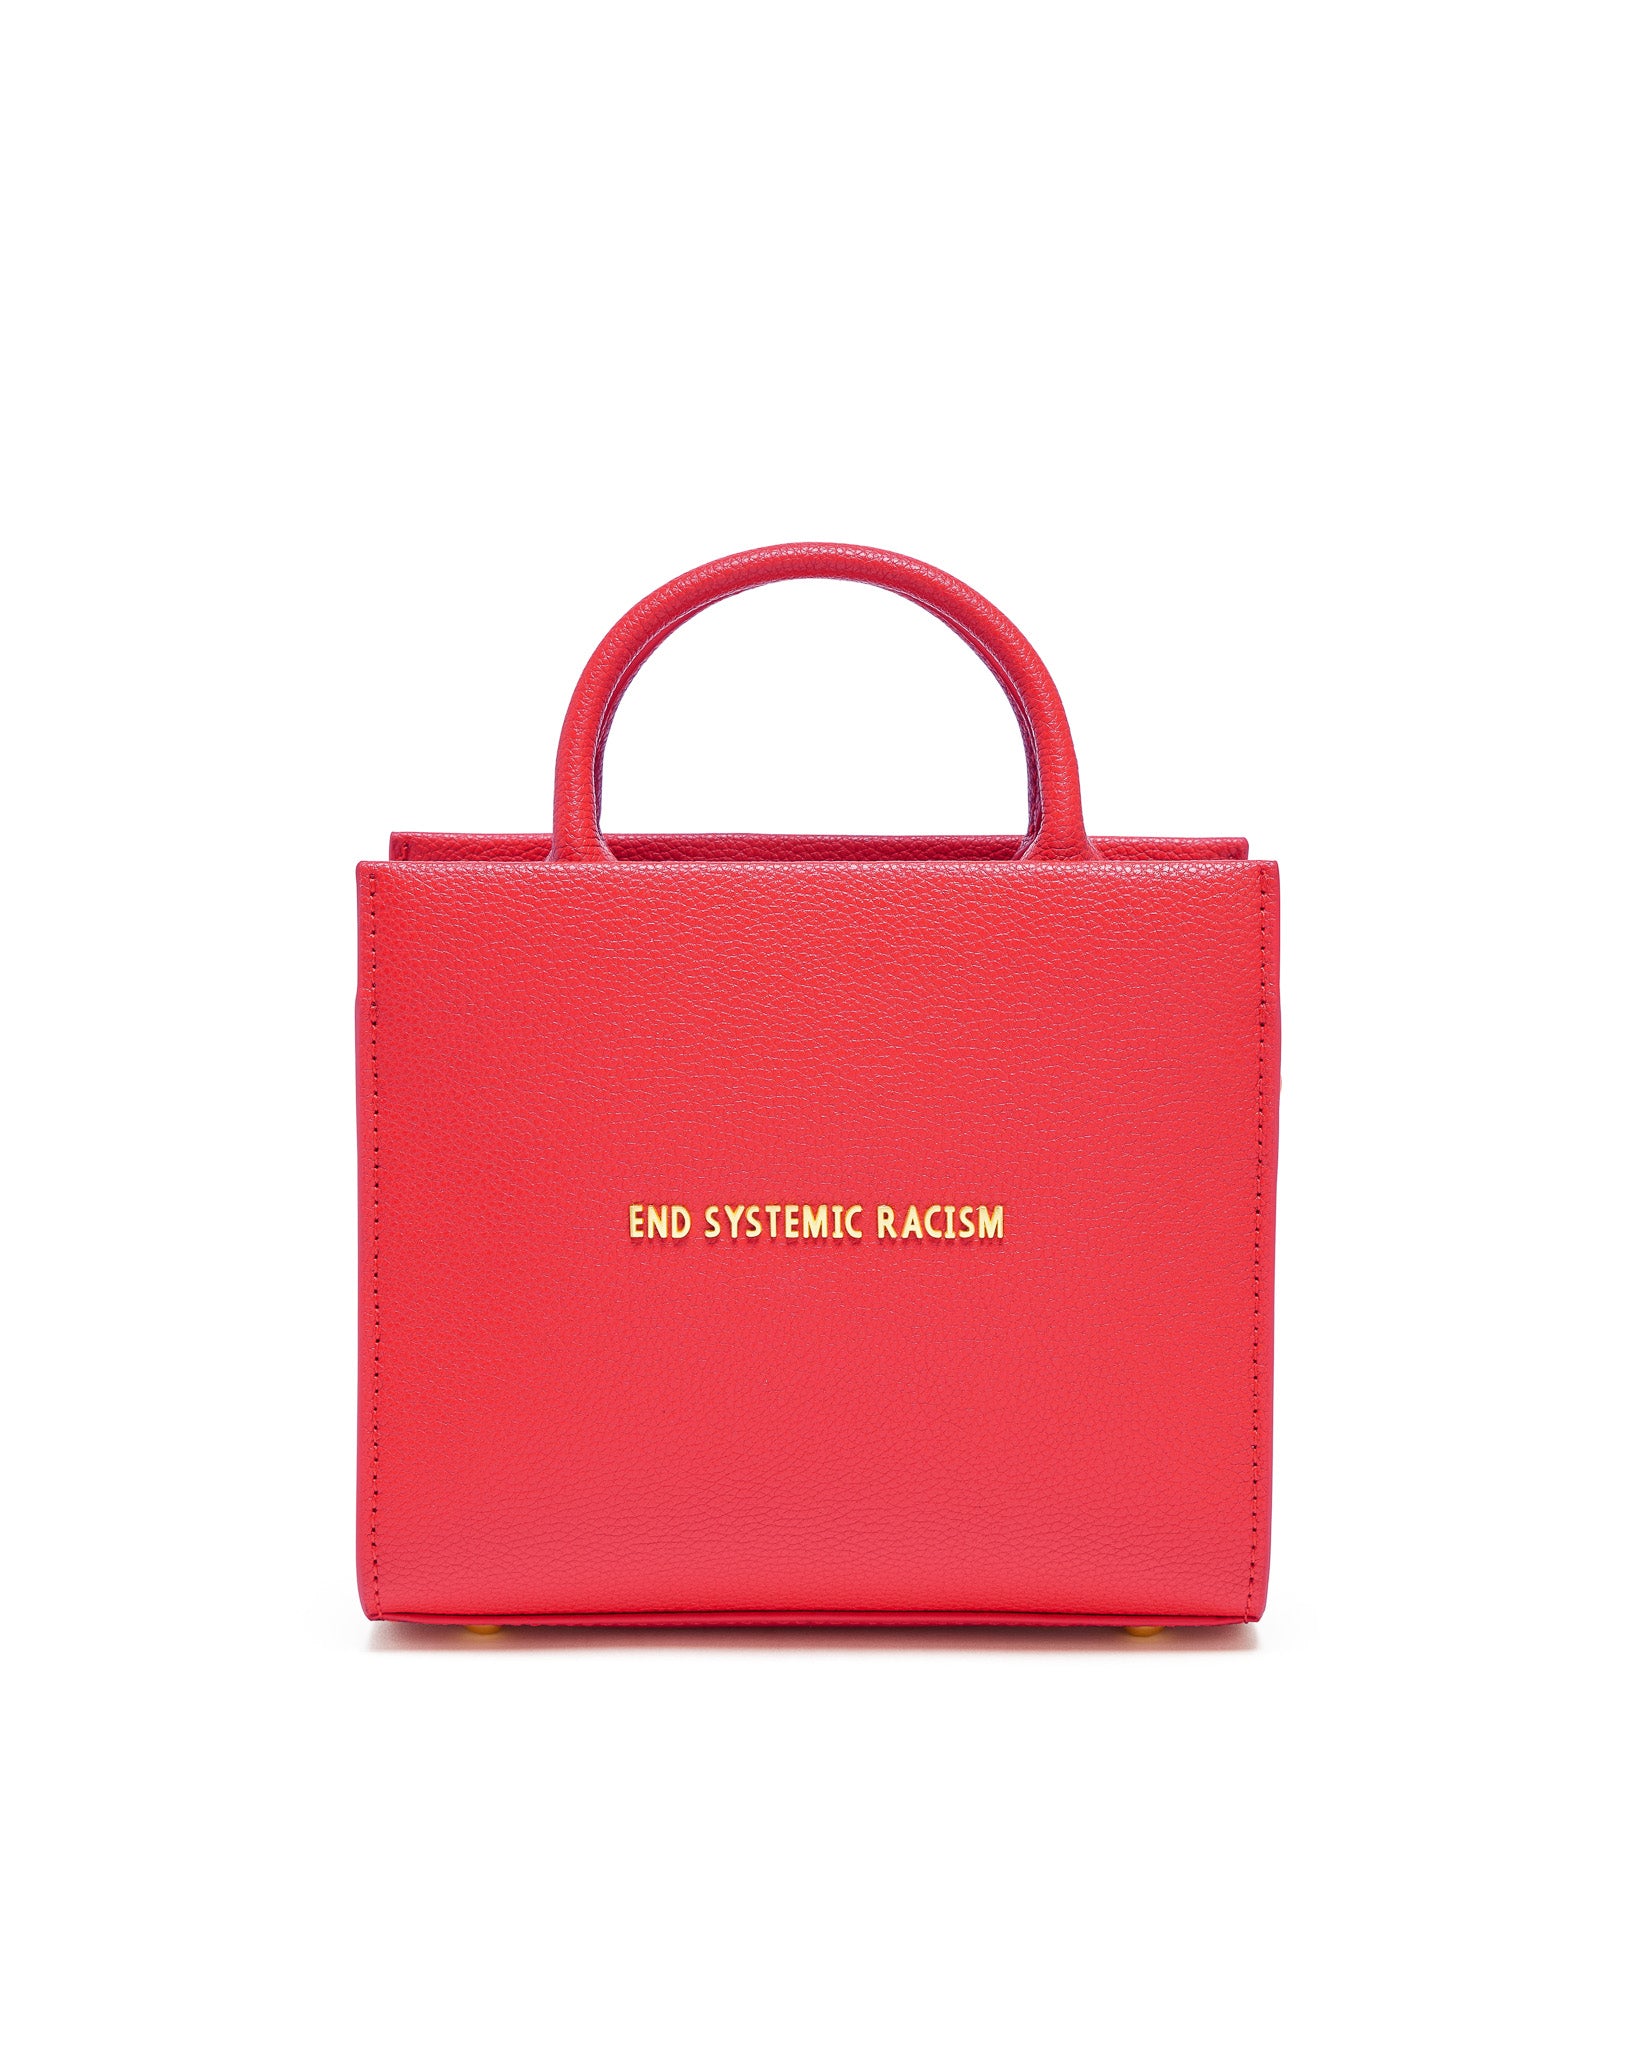 Brandon Blackwood New York - ESR Tote - Red Recycled Leather